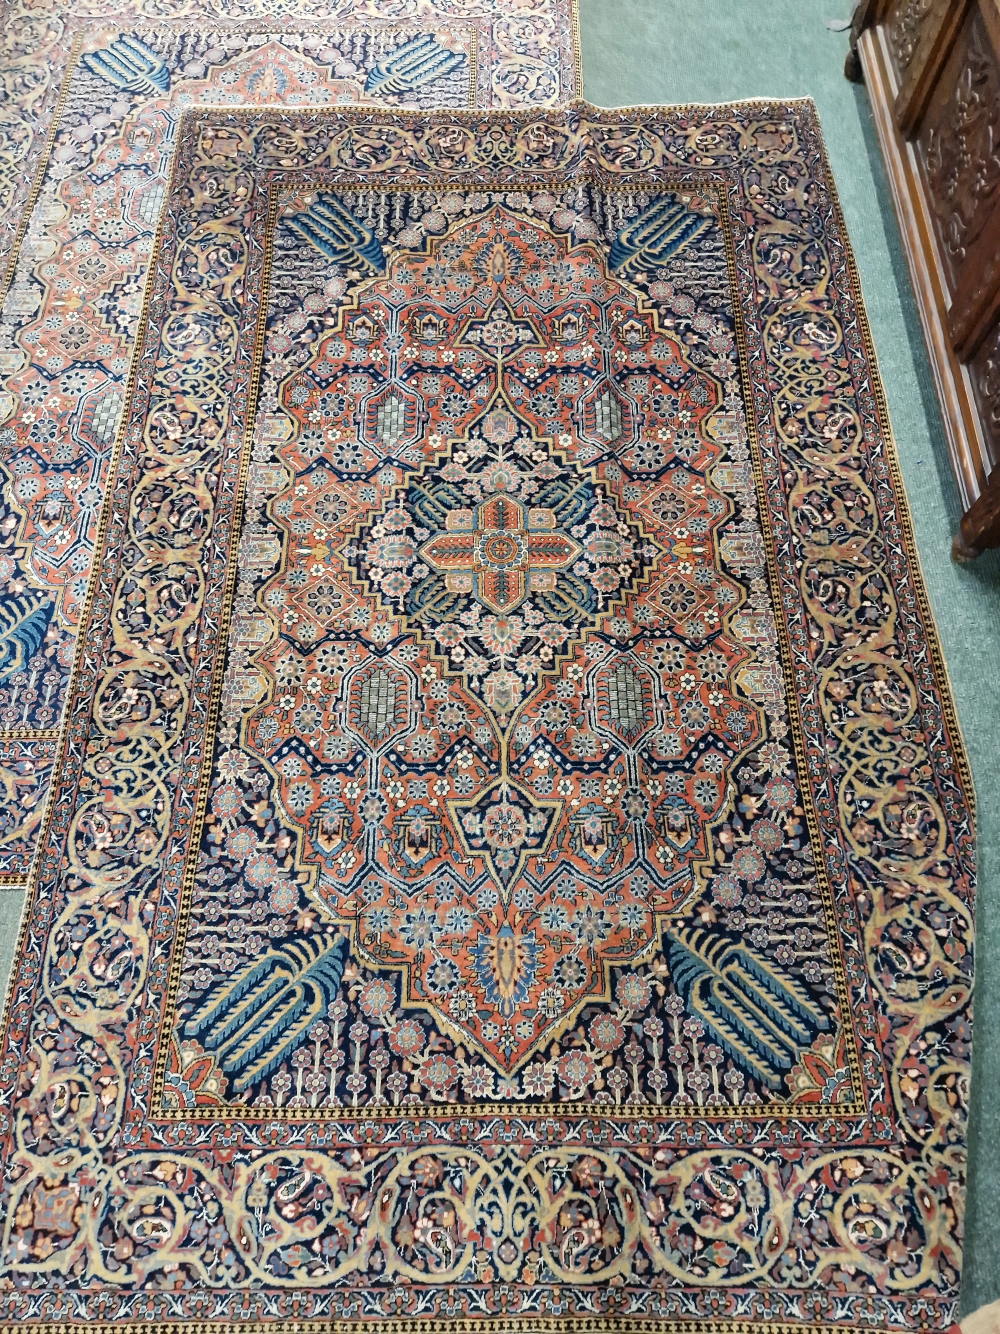 A PAIR OF ANTIQUE PERSIAN KASHAN RUGS. 298 x 132cms - Image 2 of 12